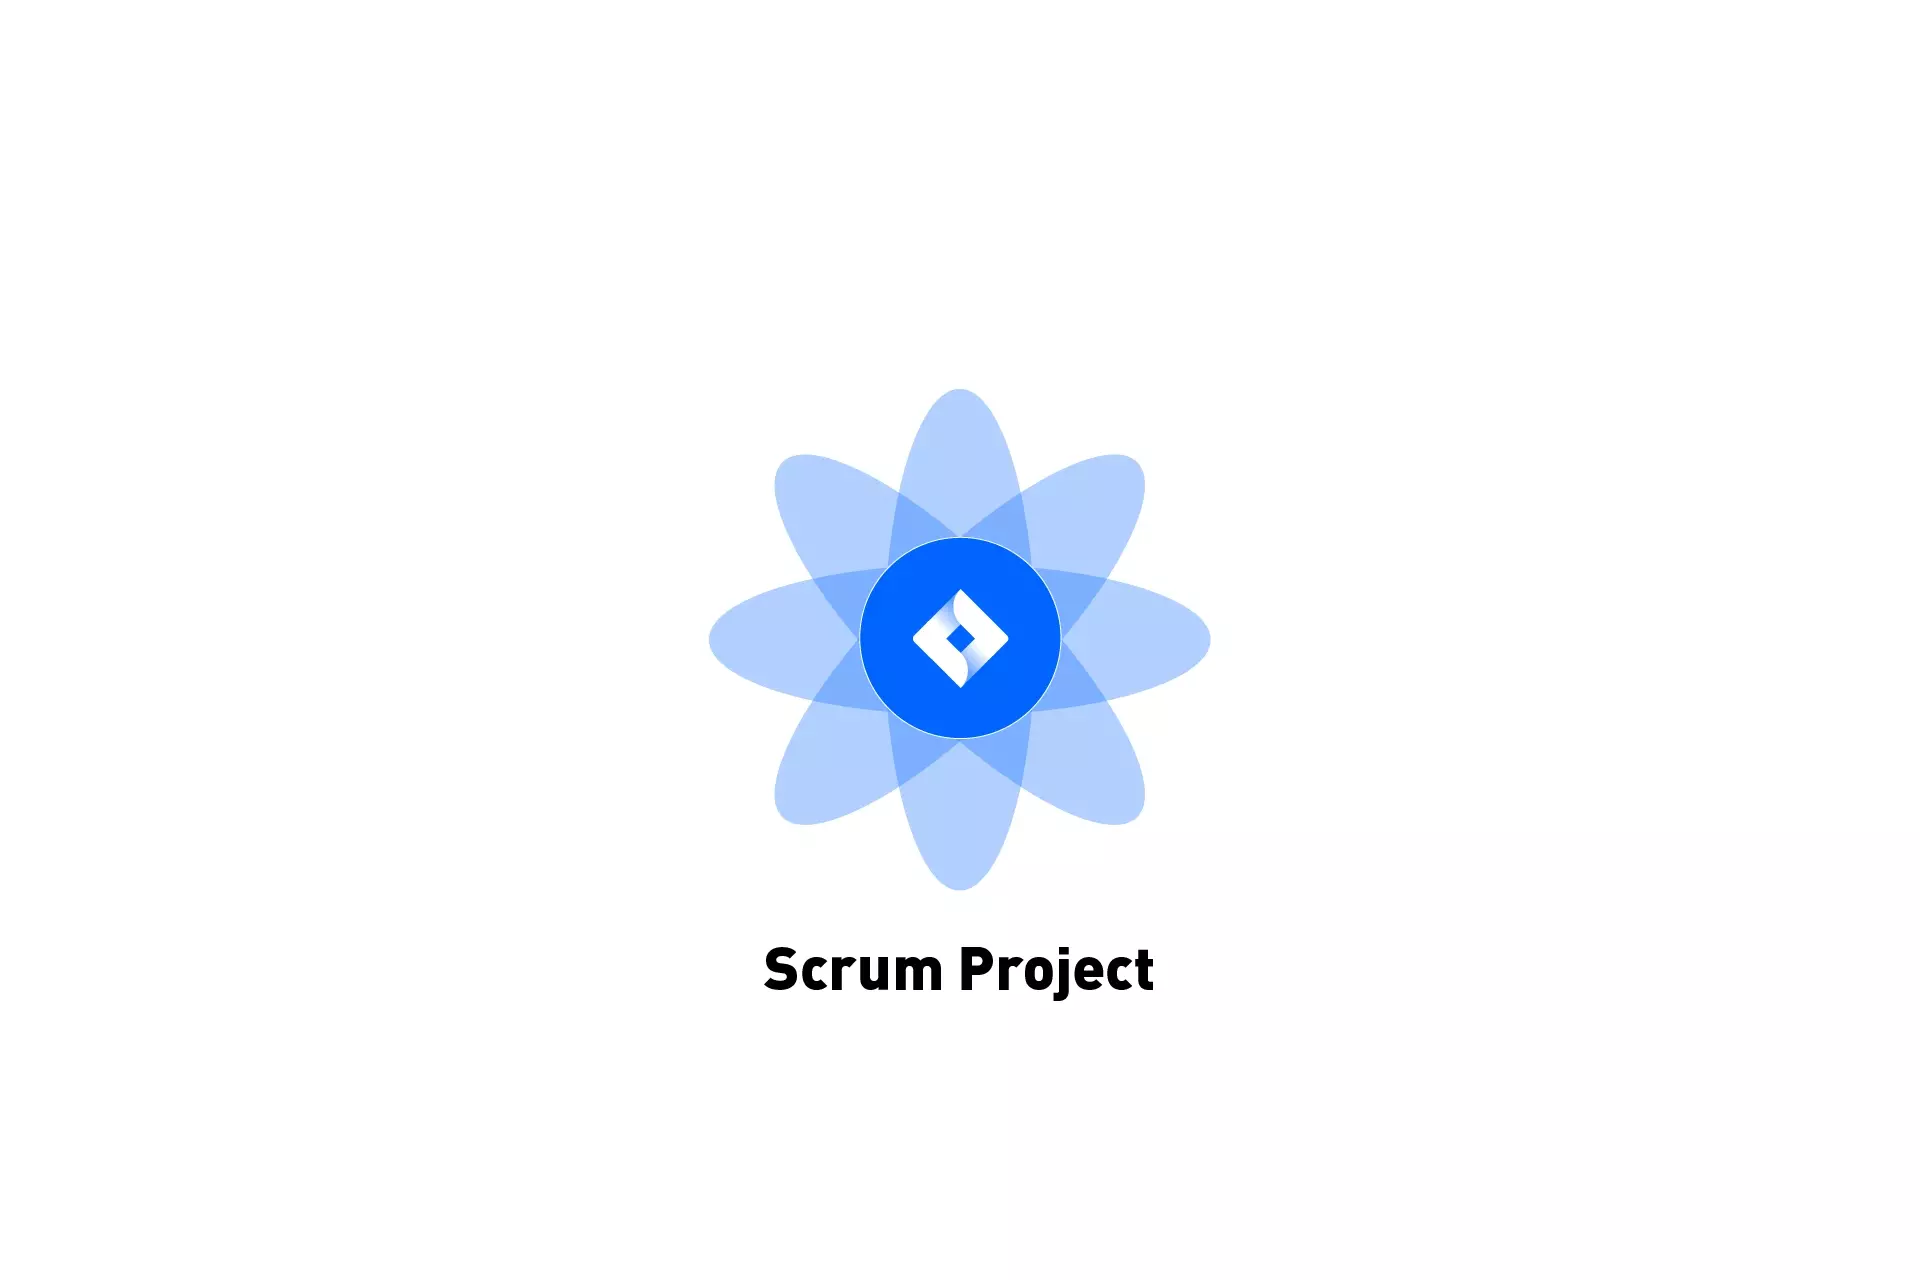 A flower that represents JIRA with the text "Scrum Project" beneath it.